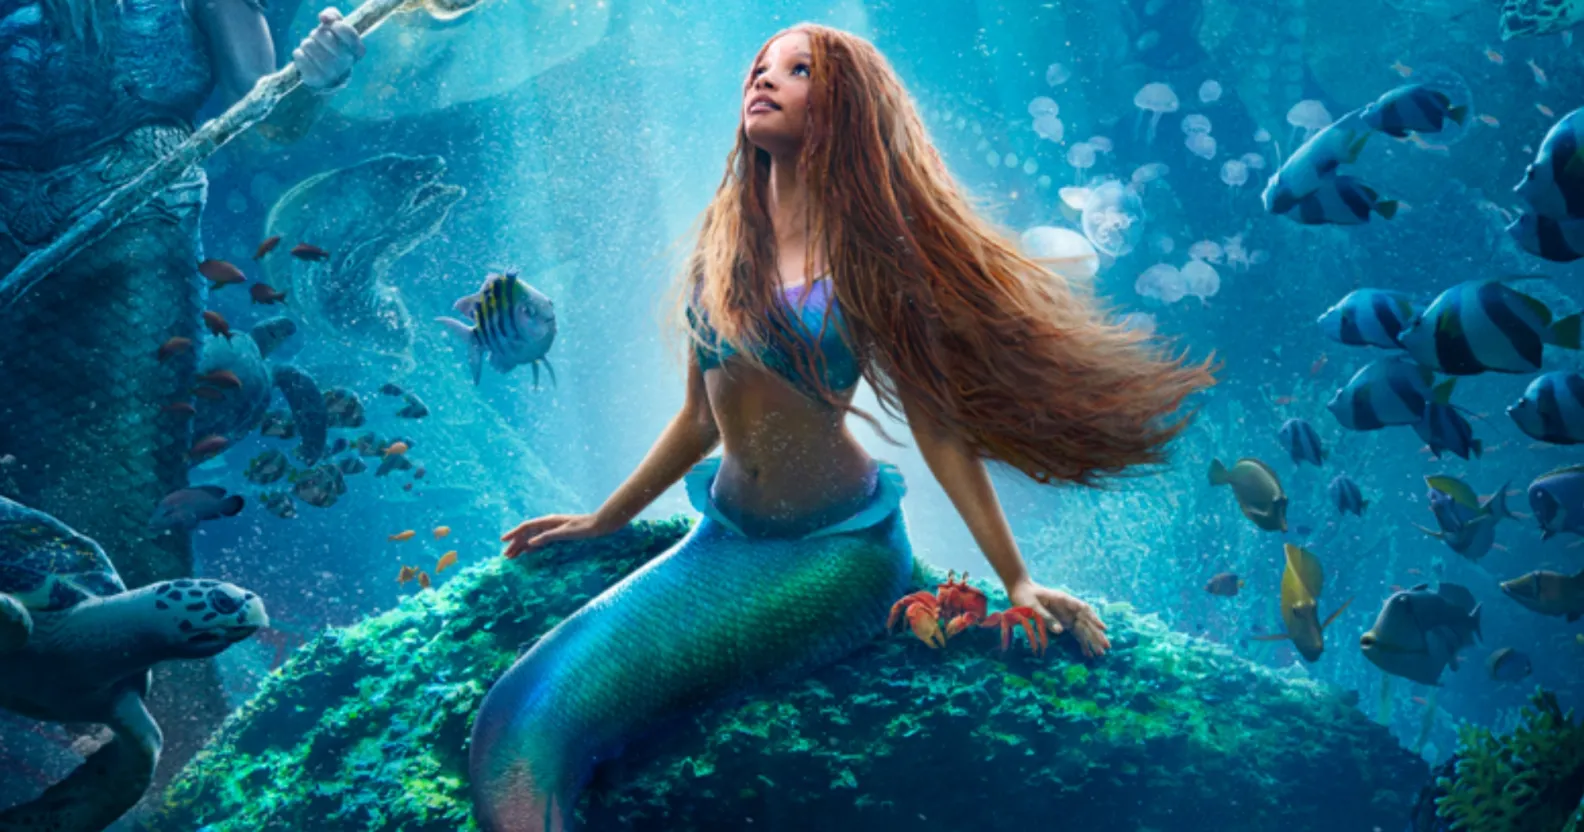 The Little Mermaid: First reviews flood in after film's premiere